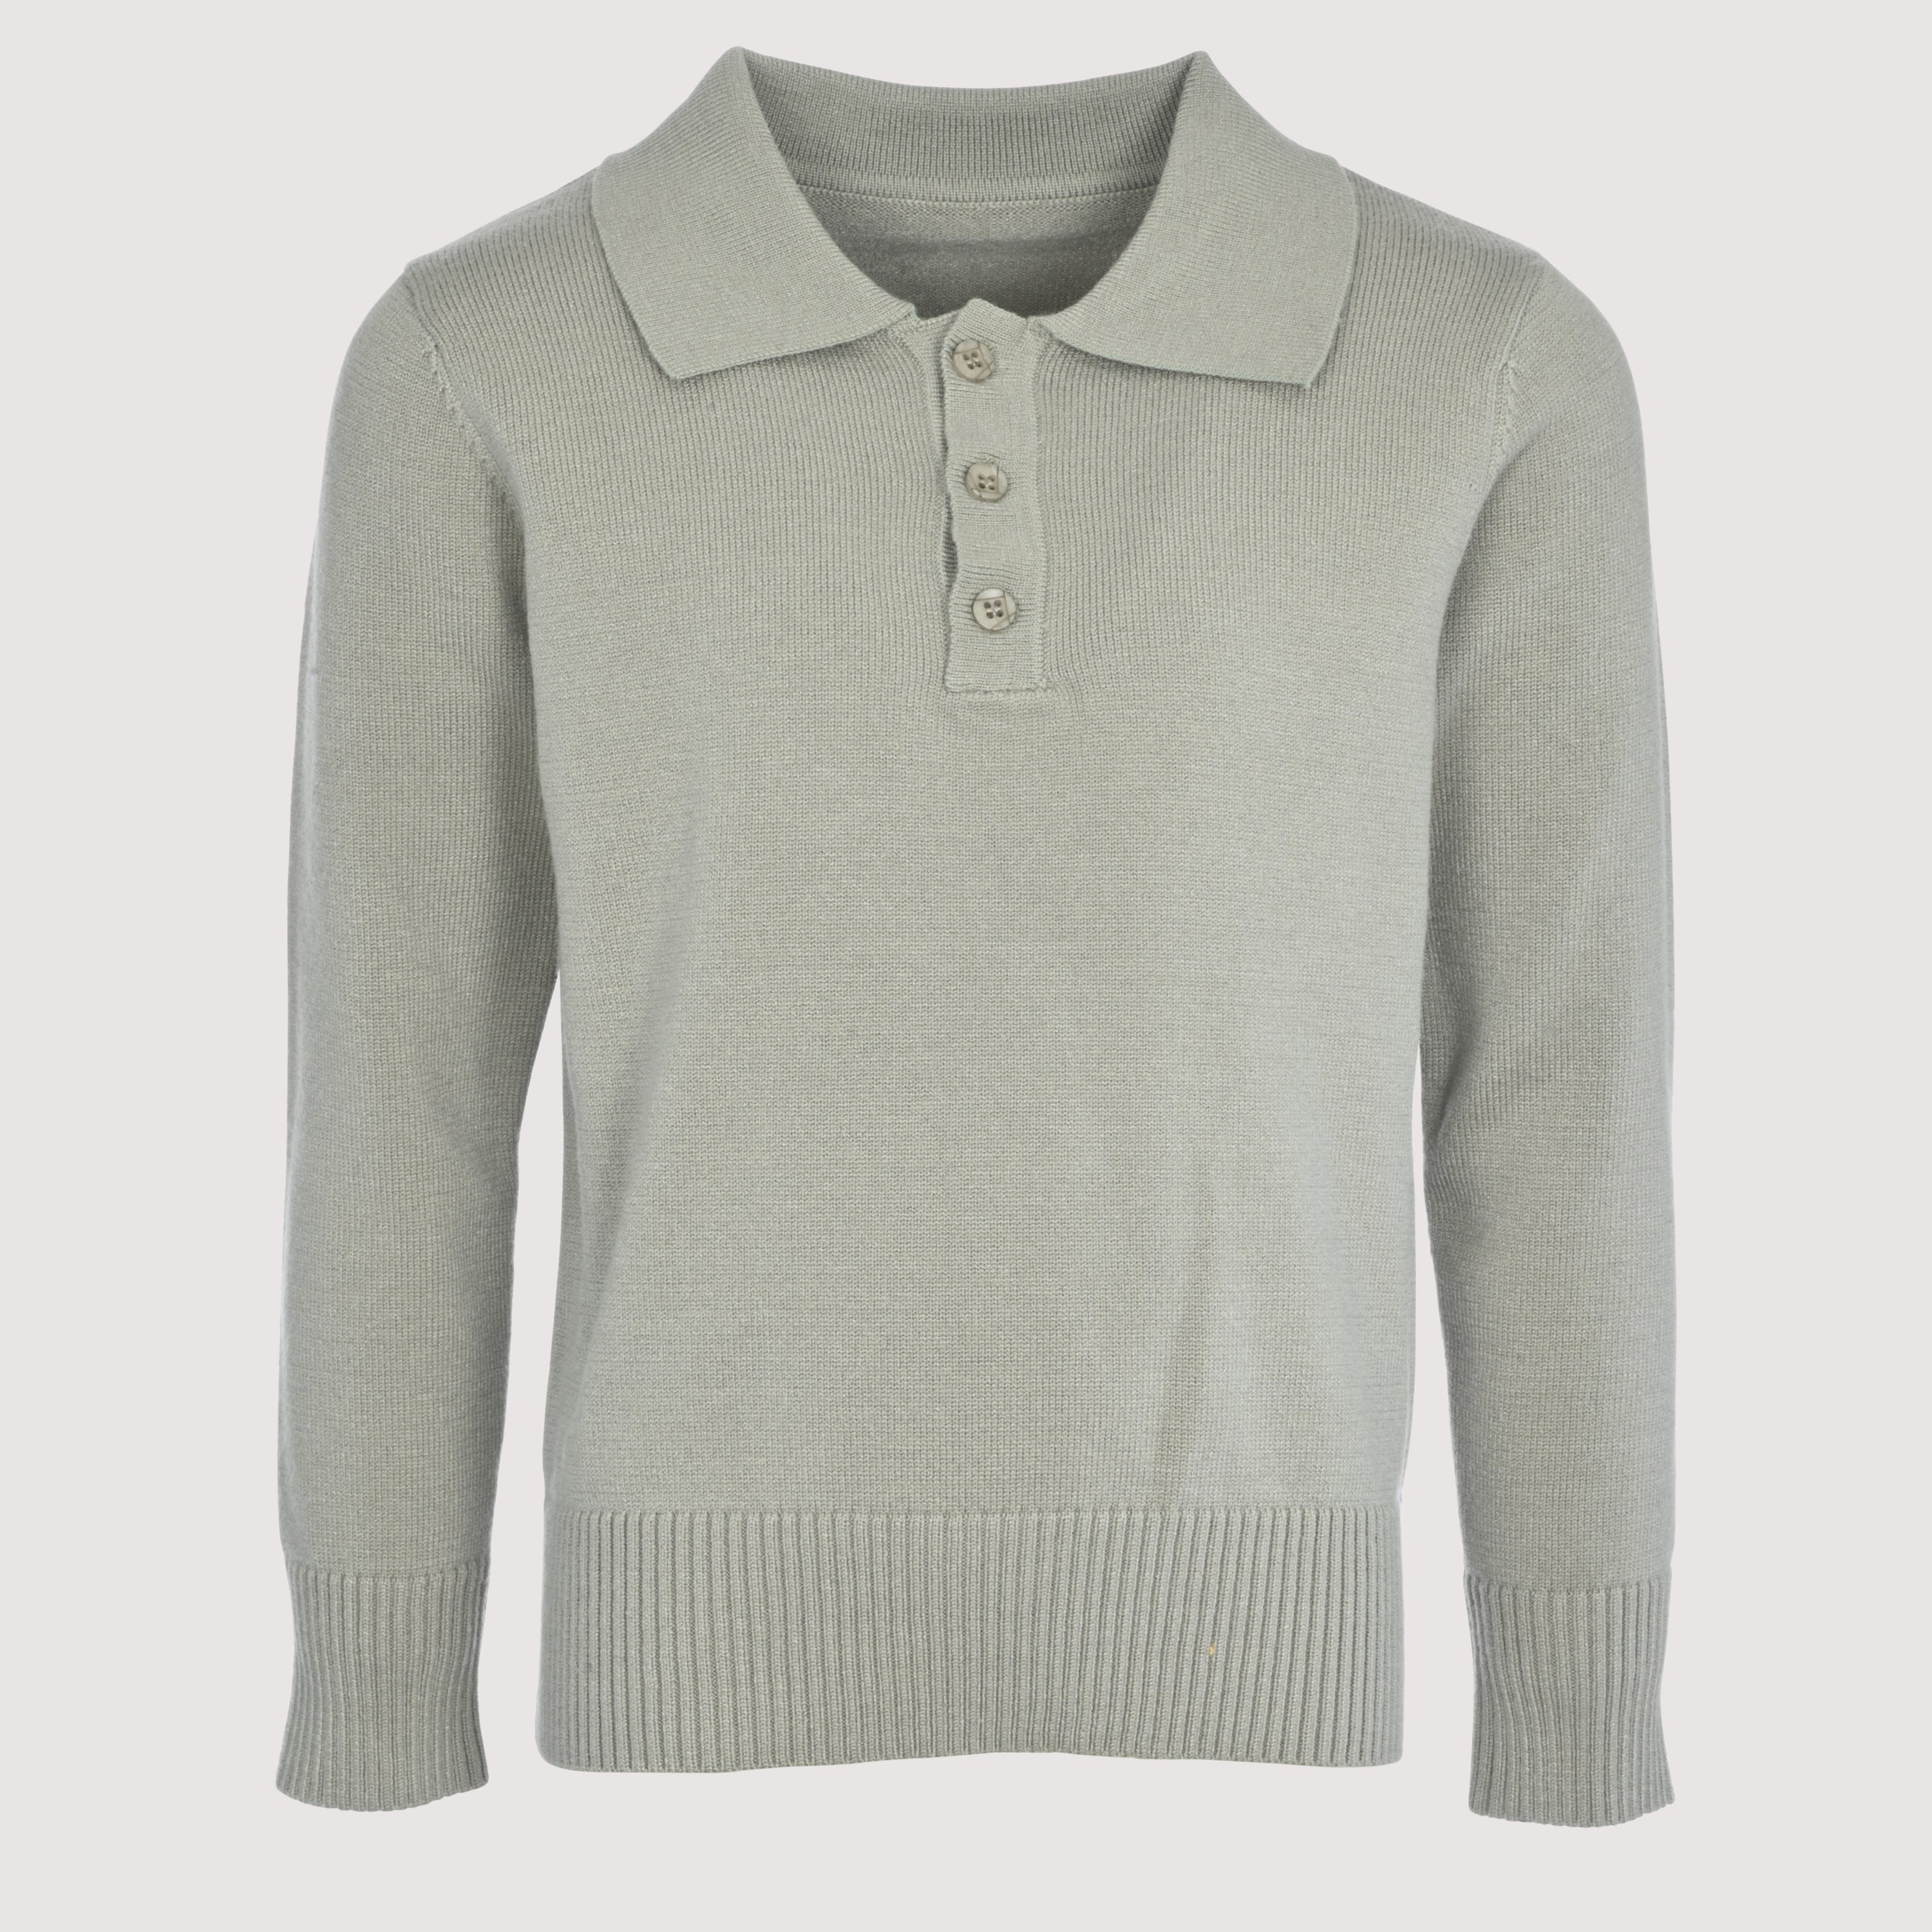 One Child Mint Belmont Polo Sweater 